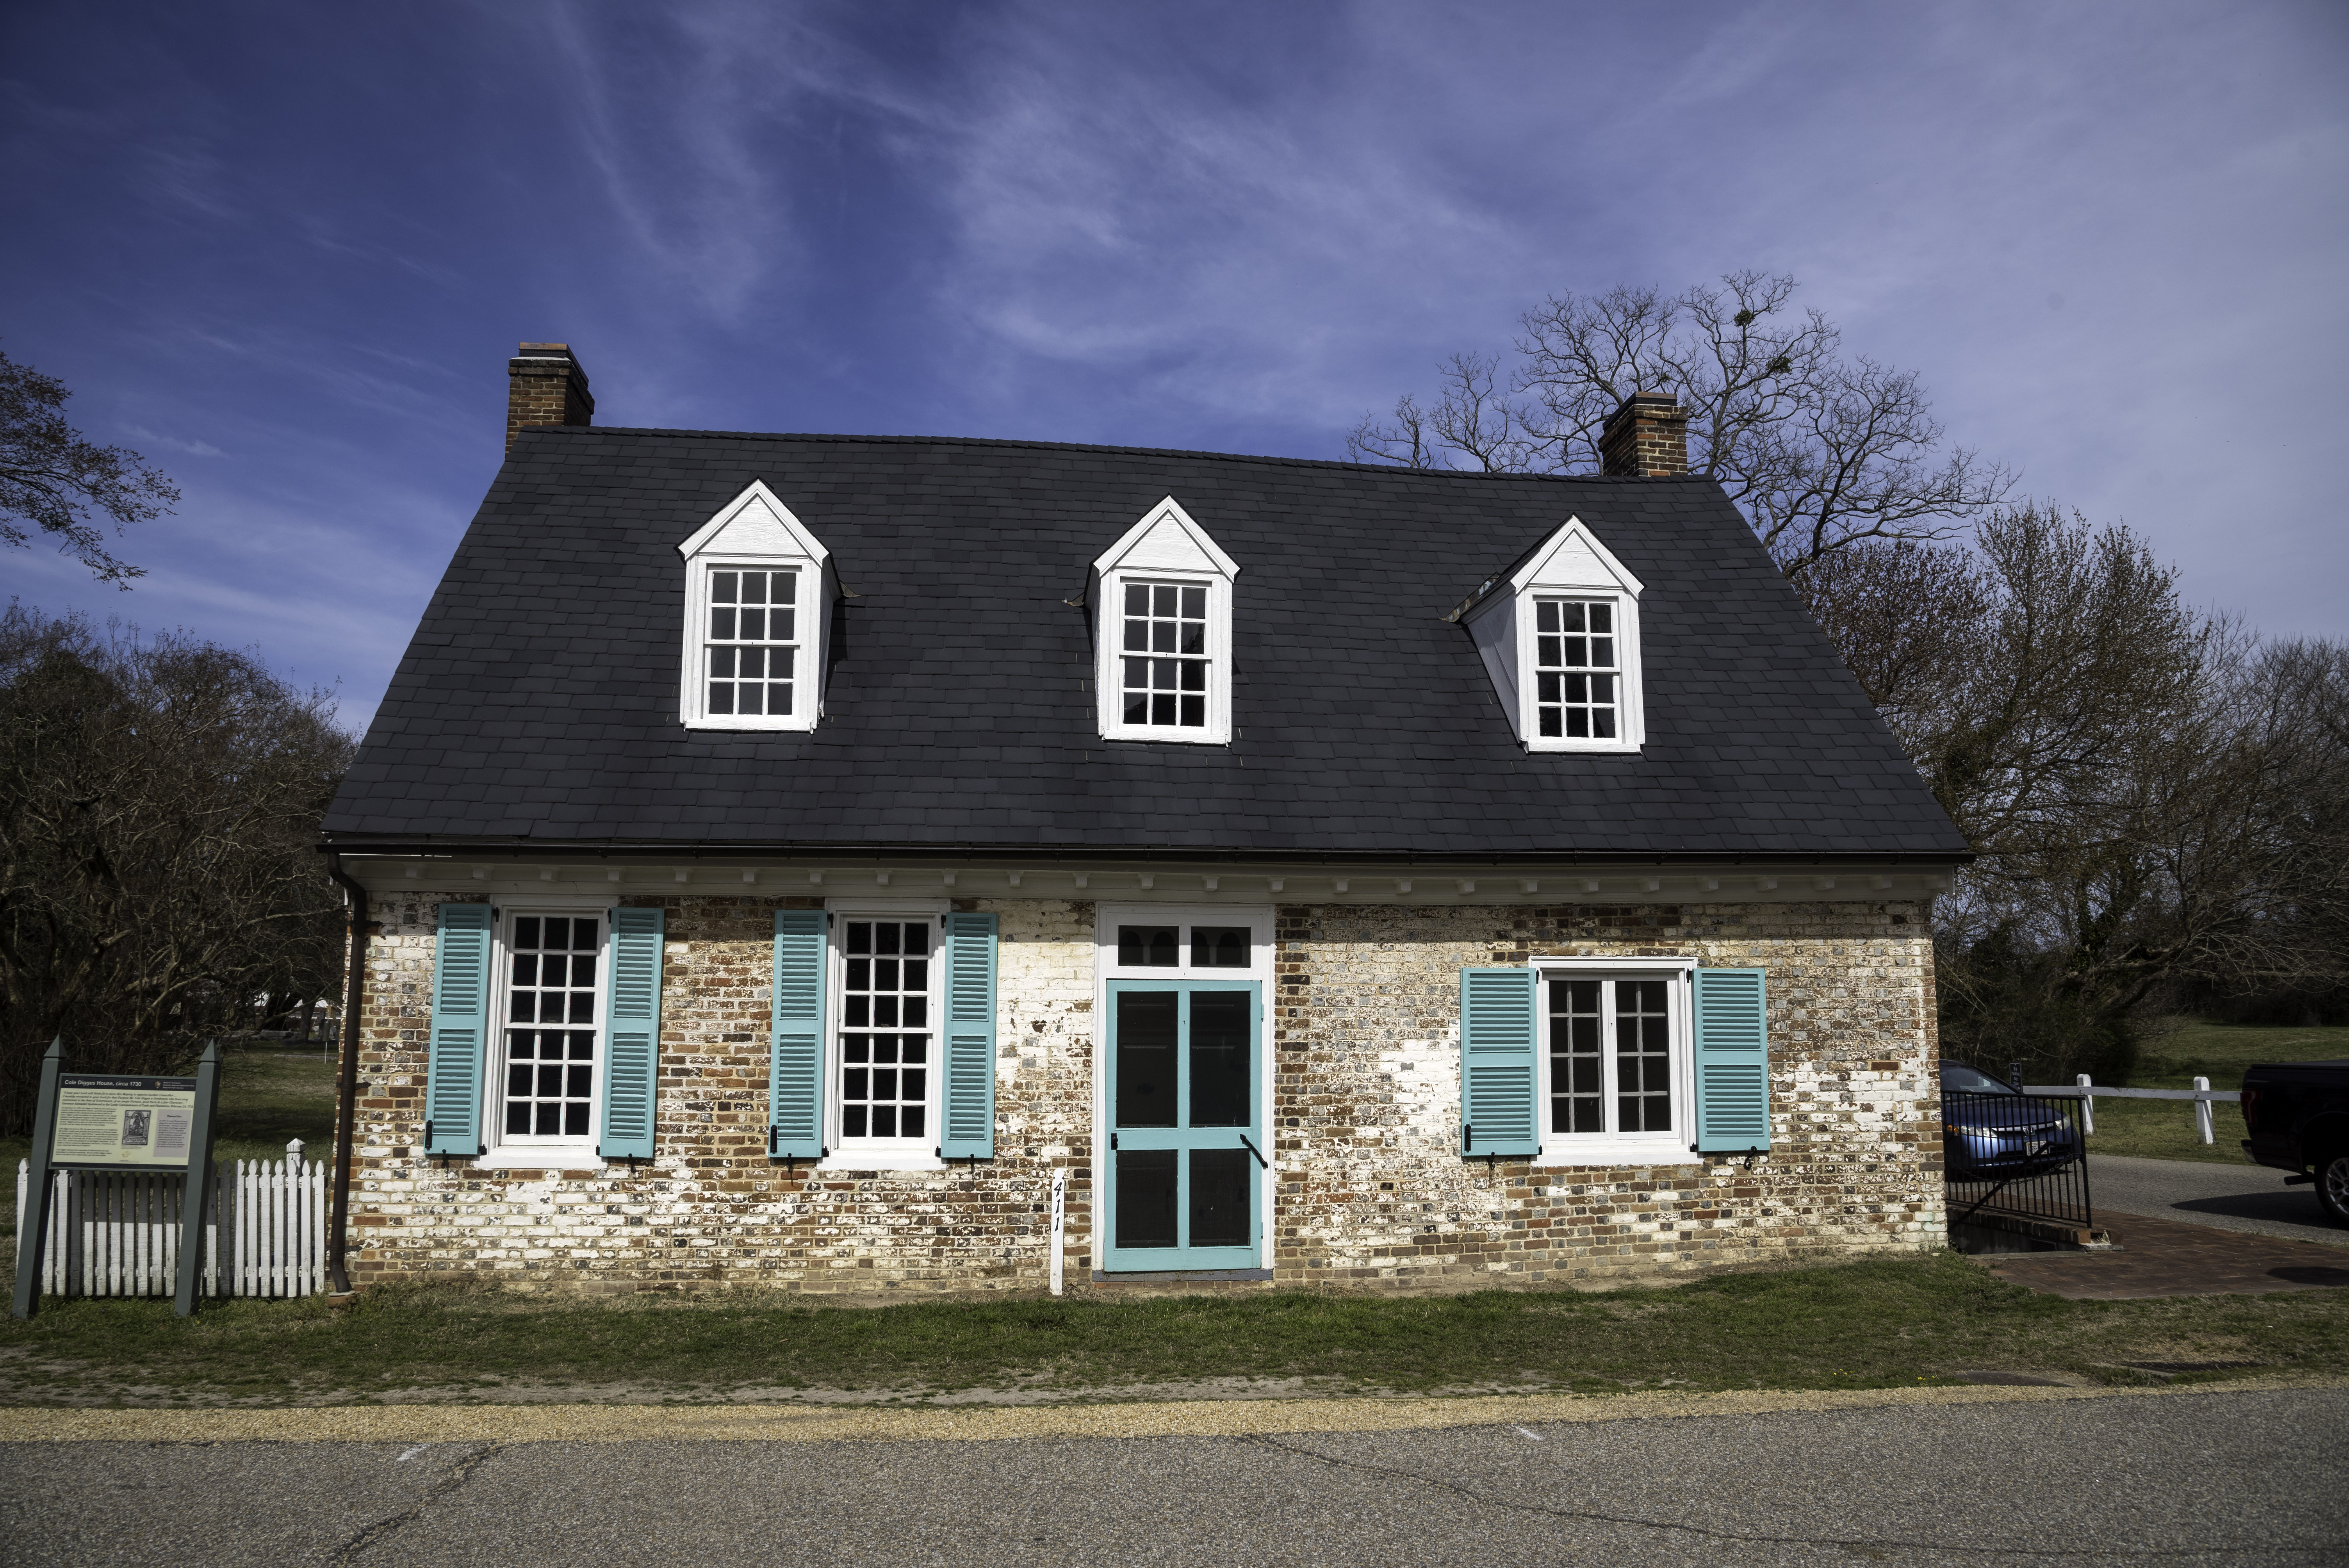 Old Colonial House in Yorktown, Virginia image - Free stock photo ...